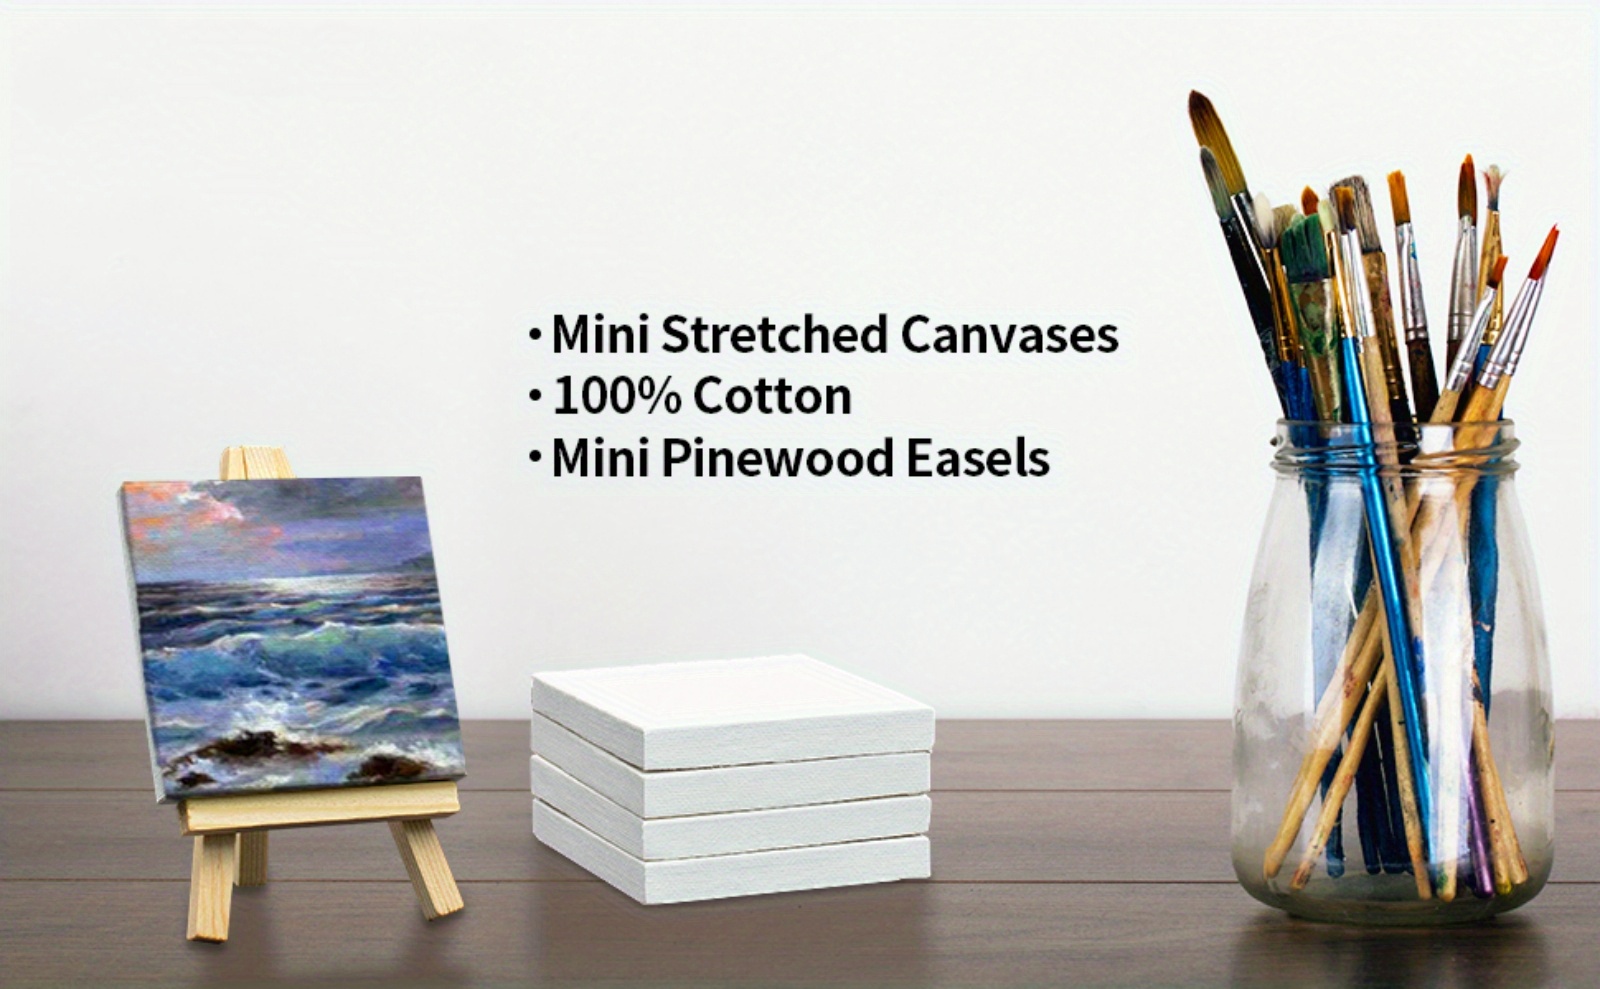  Toddmomy Stretched Mini Canvases 12 Sets Small